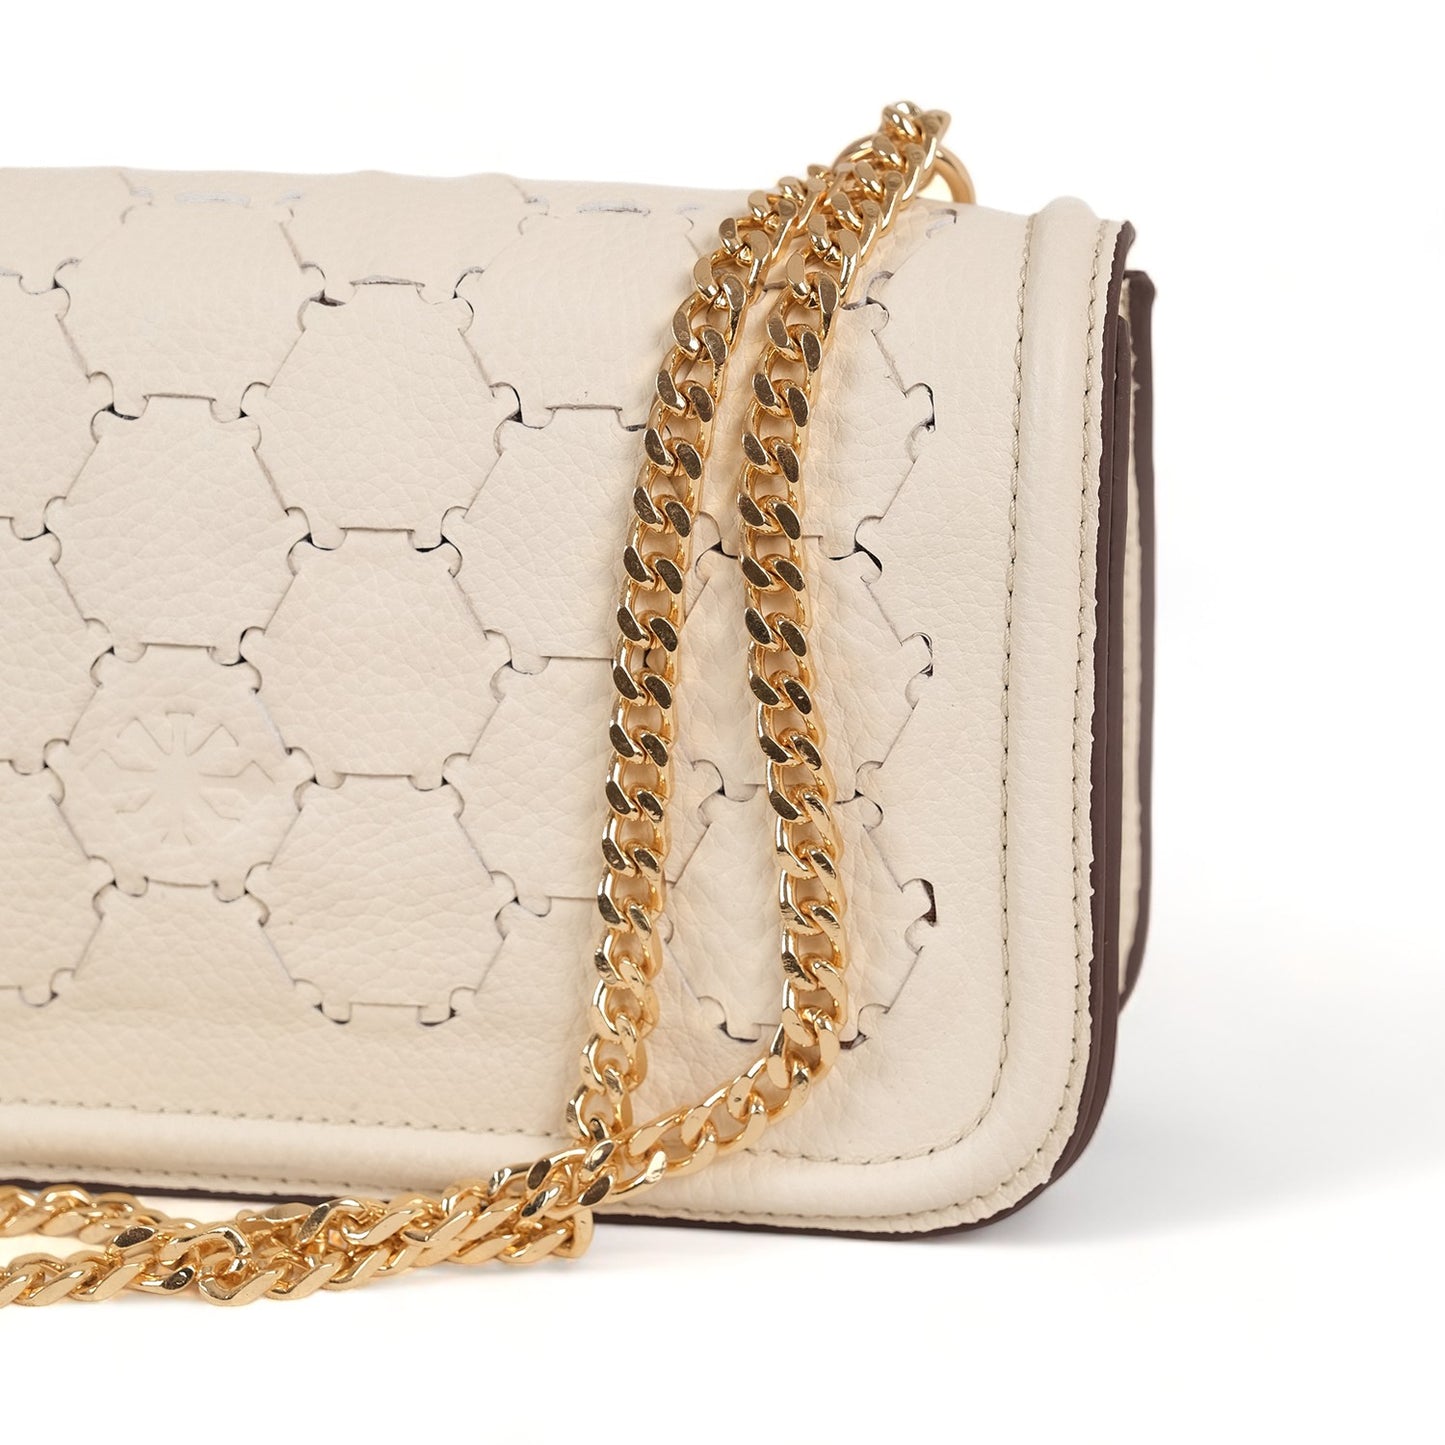 Anqa Woven Leather Baguette Crossbody & Shoulder Bag White